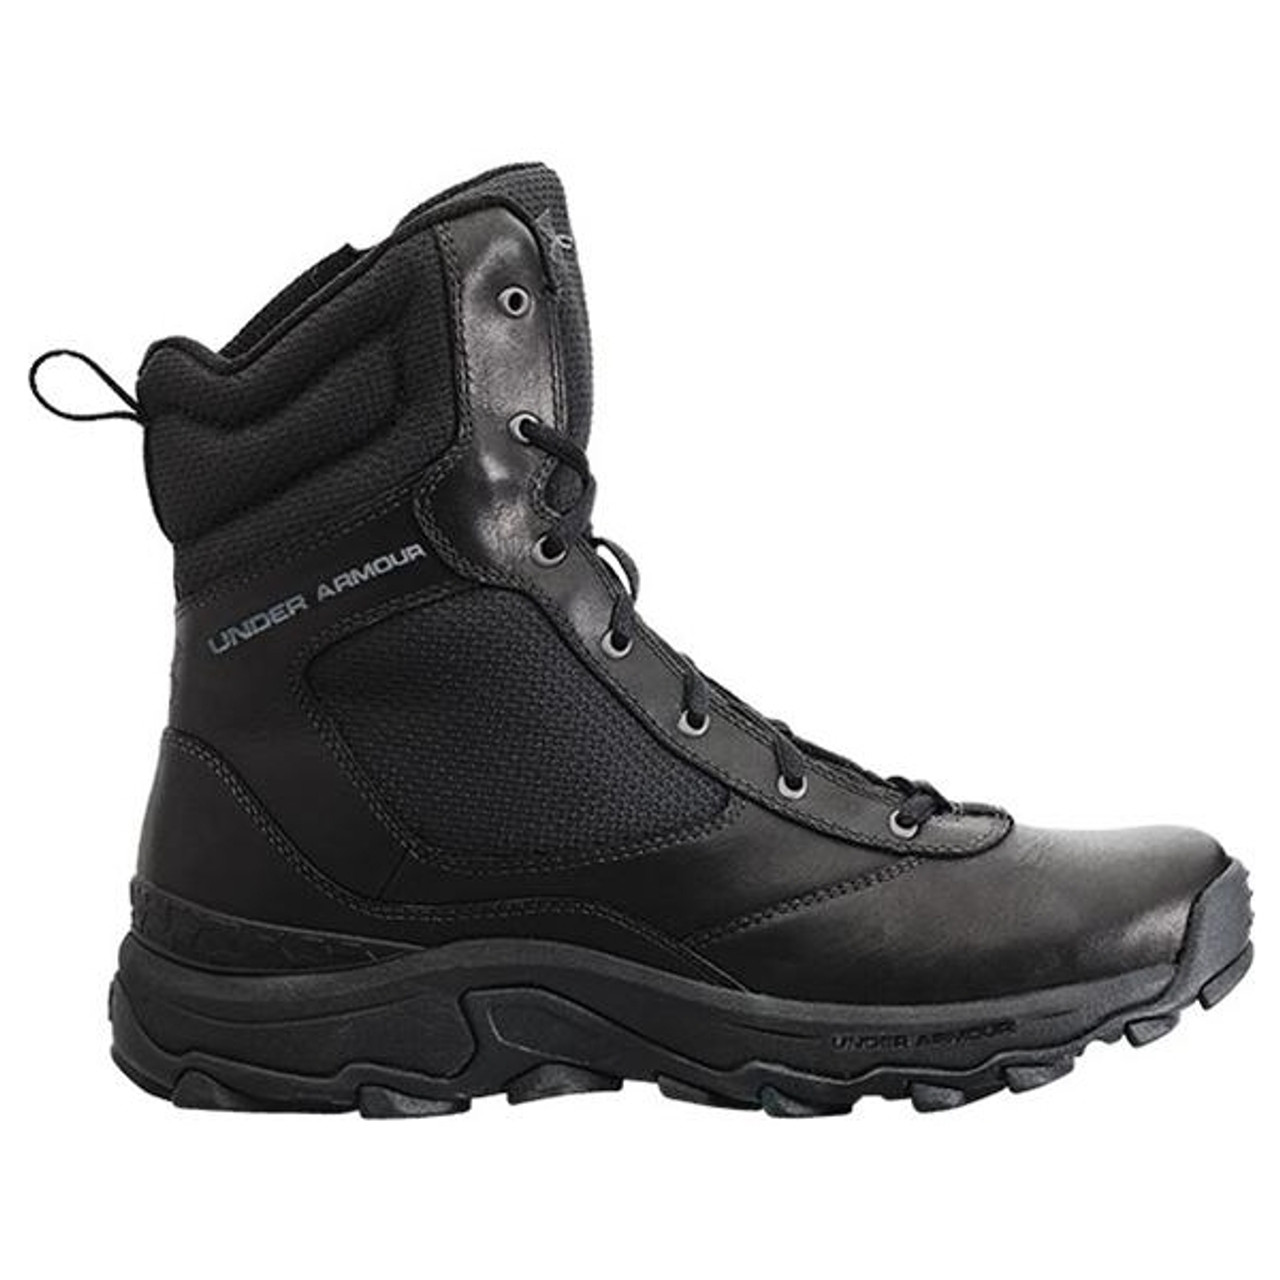 under armor safety toe boots Sale,up to 